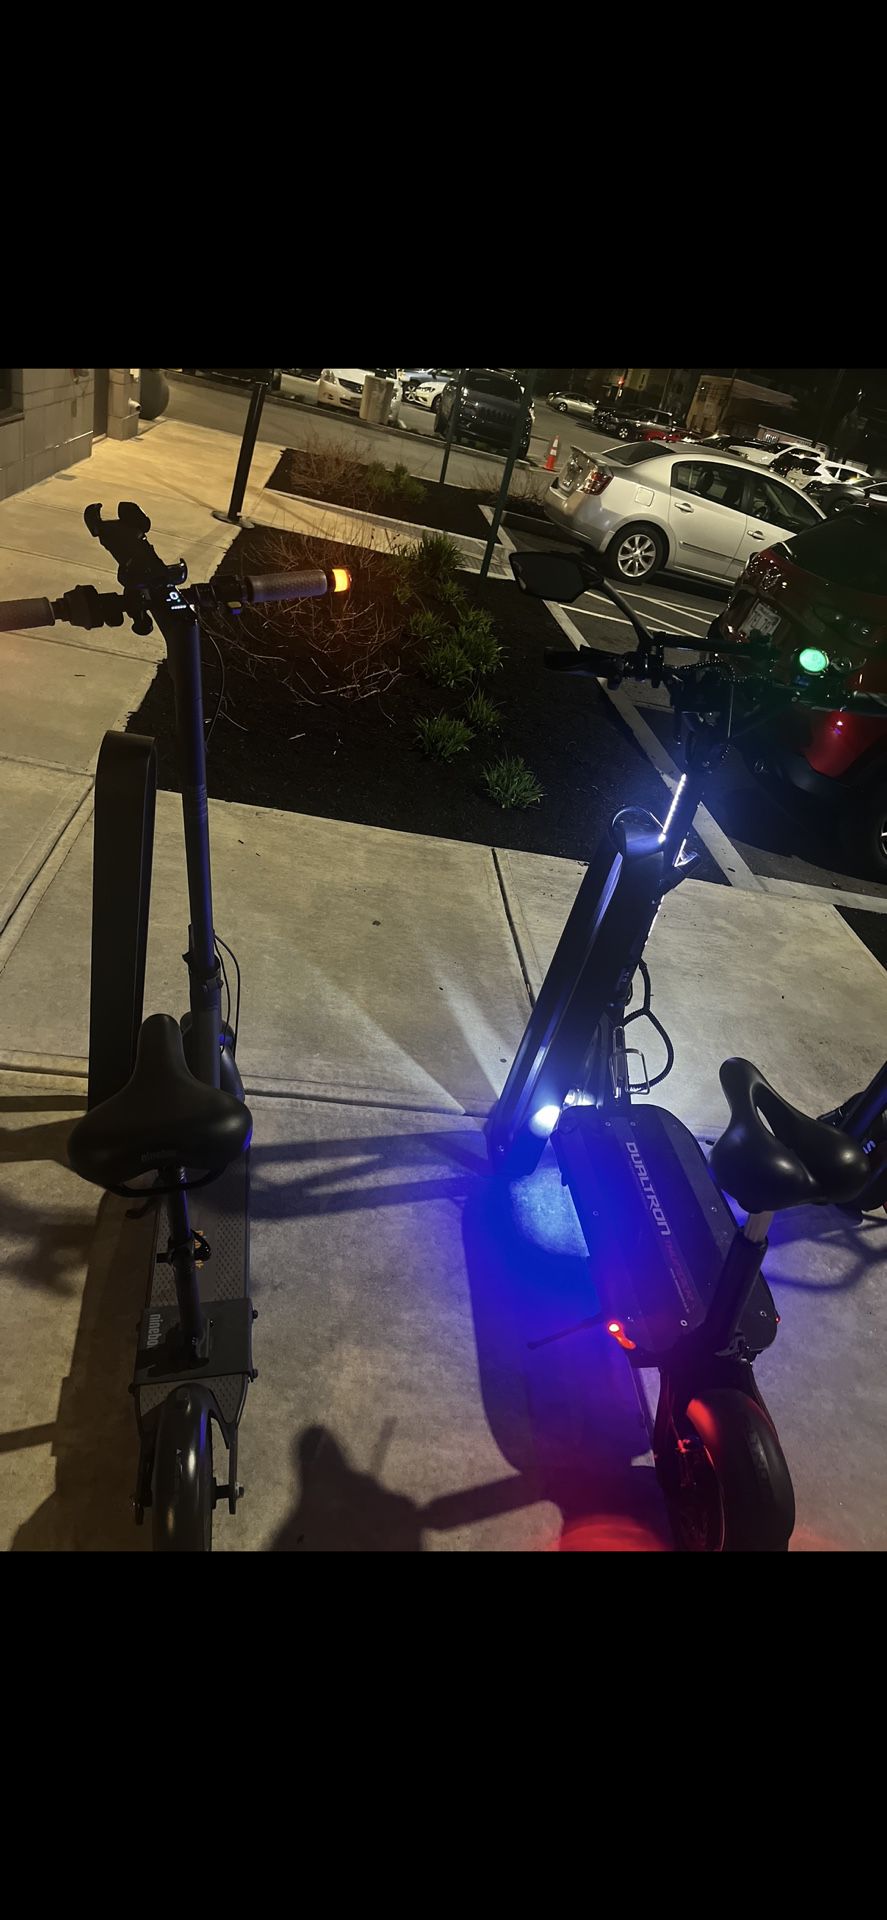 2 Electric scooters - Segway Ninebot And Dual Tron THUNDER